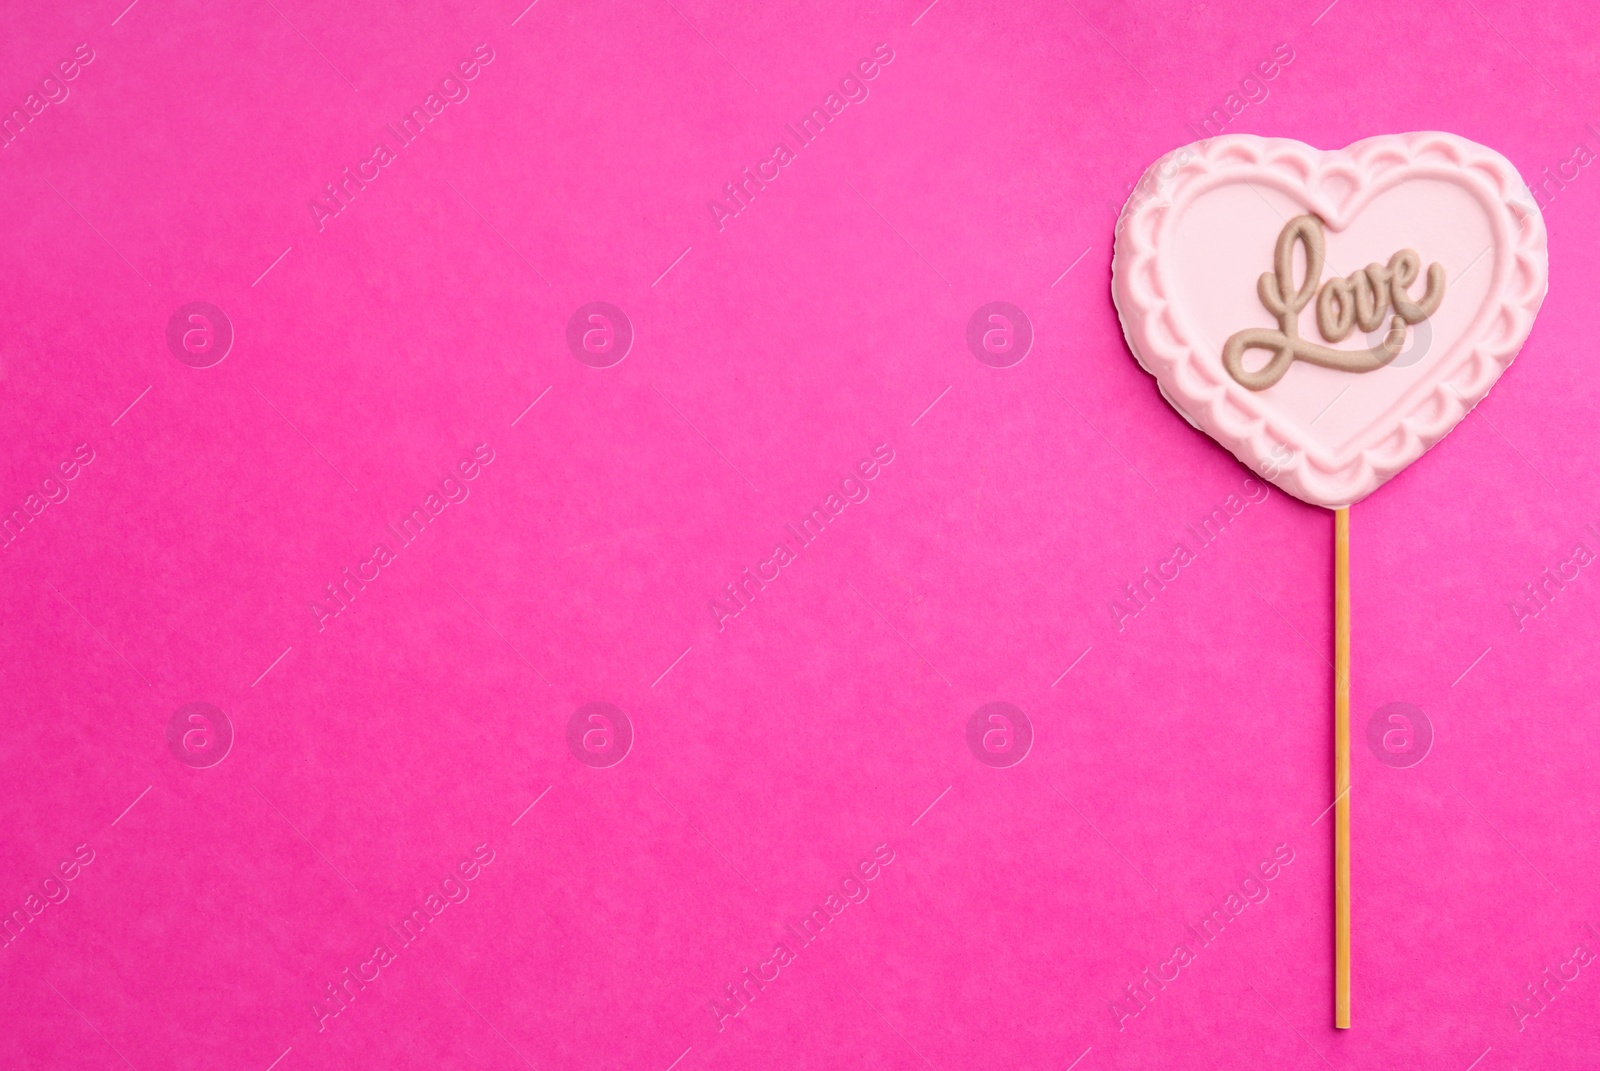 Photo of Chocolate heart shaped lollipop with word Love on pink background, top view. Space for text